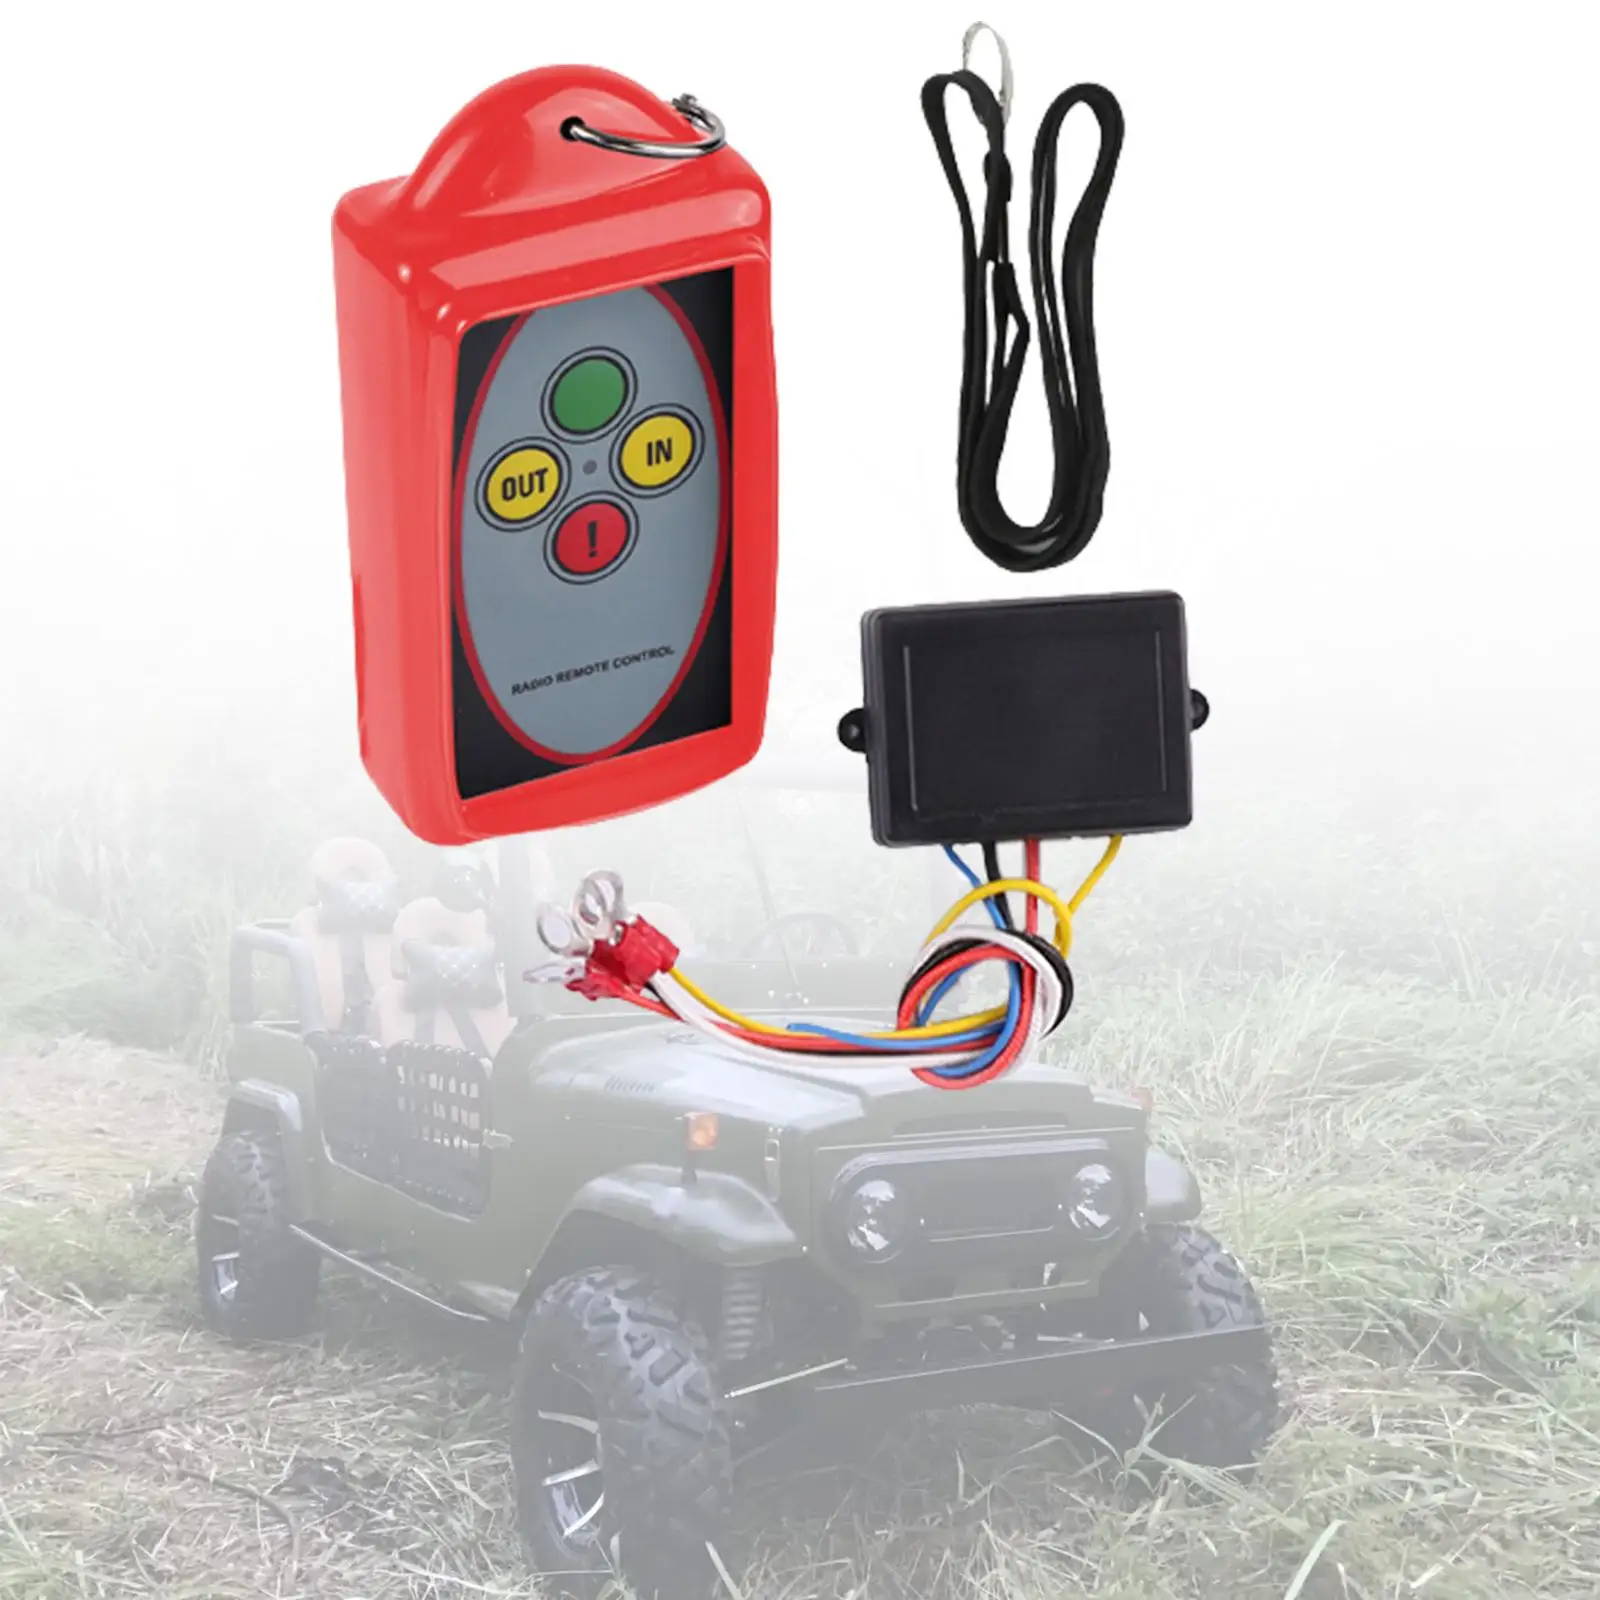 Winch Wireless Remote Control Switch Kit Car Accessories for Vehicle